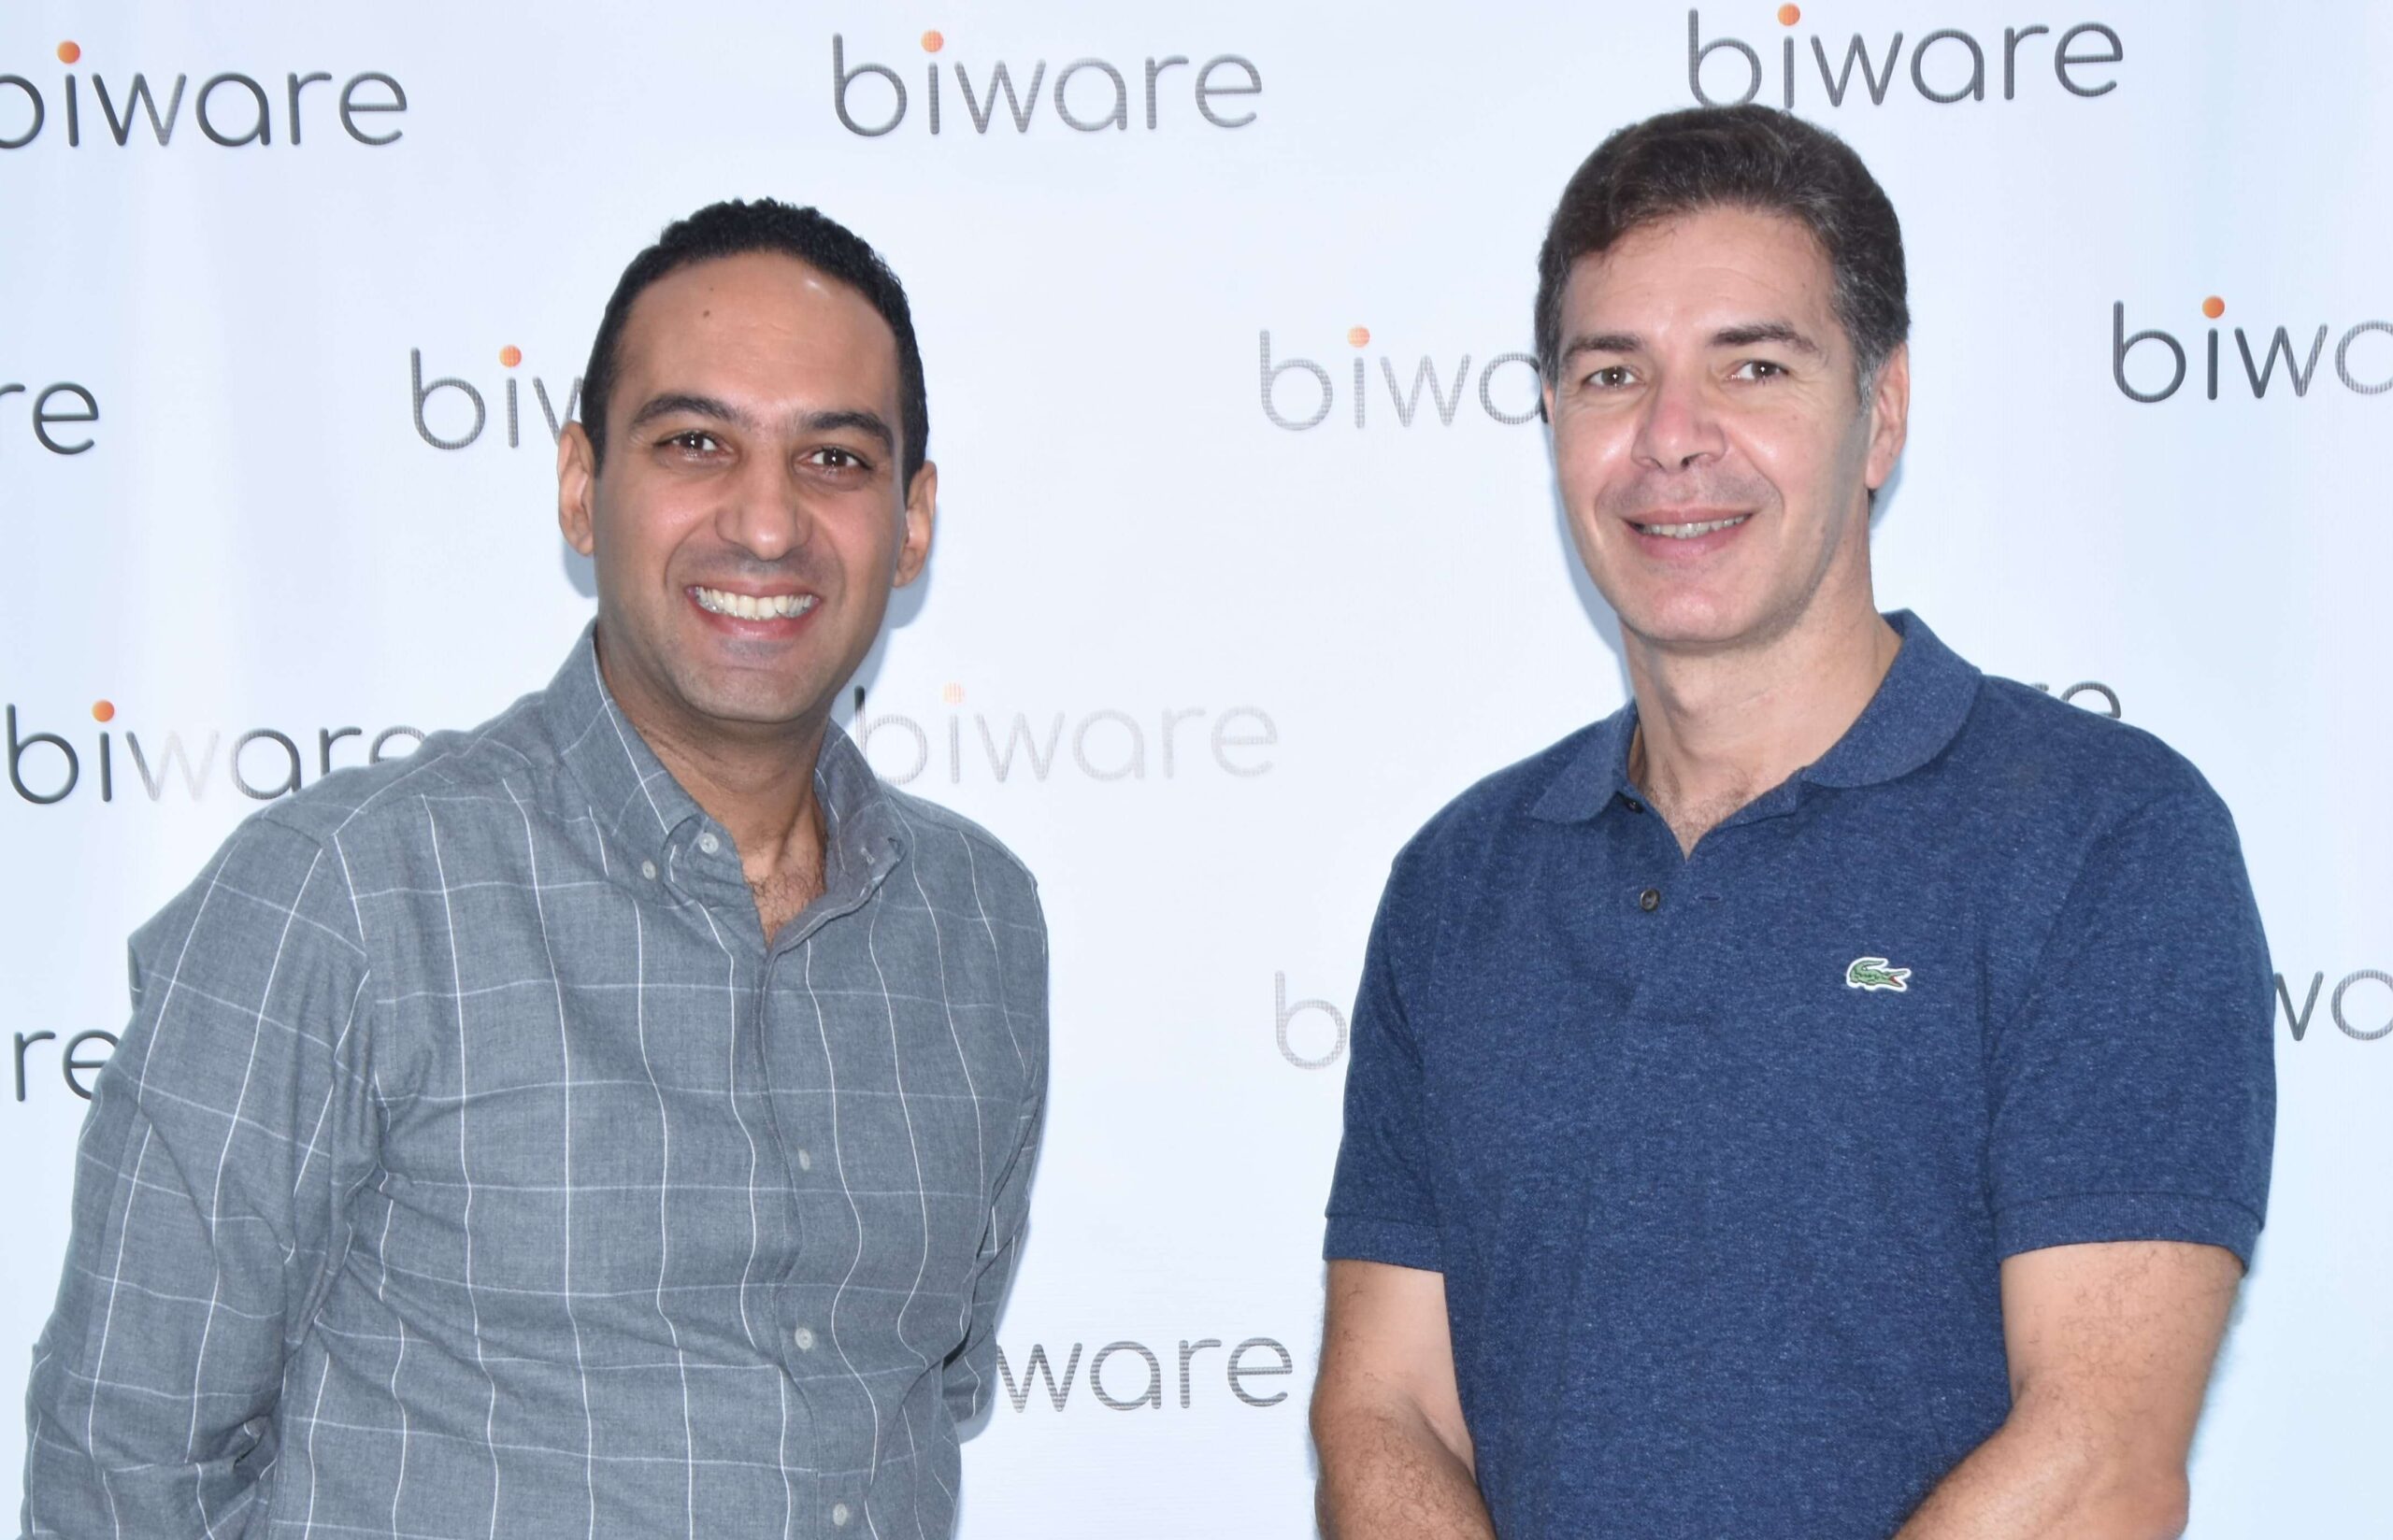 A picture of Walid Kaâbachi and Amine Boussarsar, Biware's managers